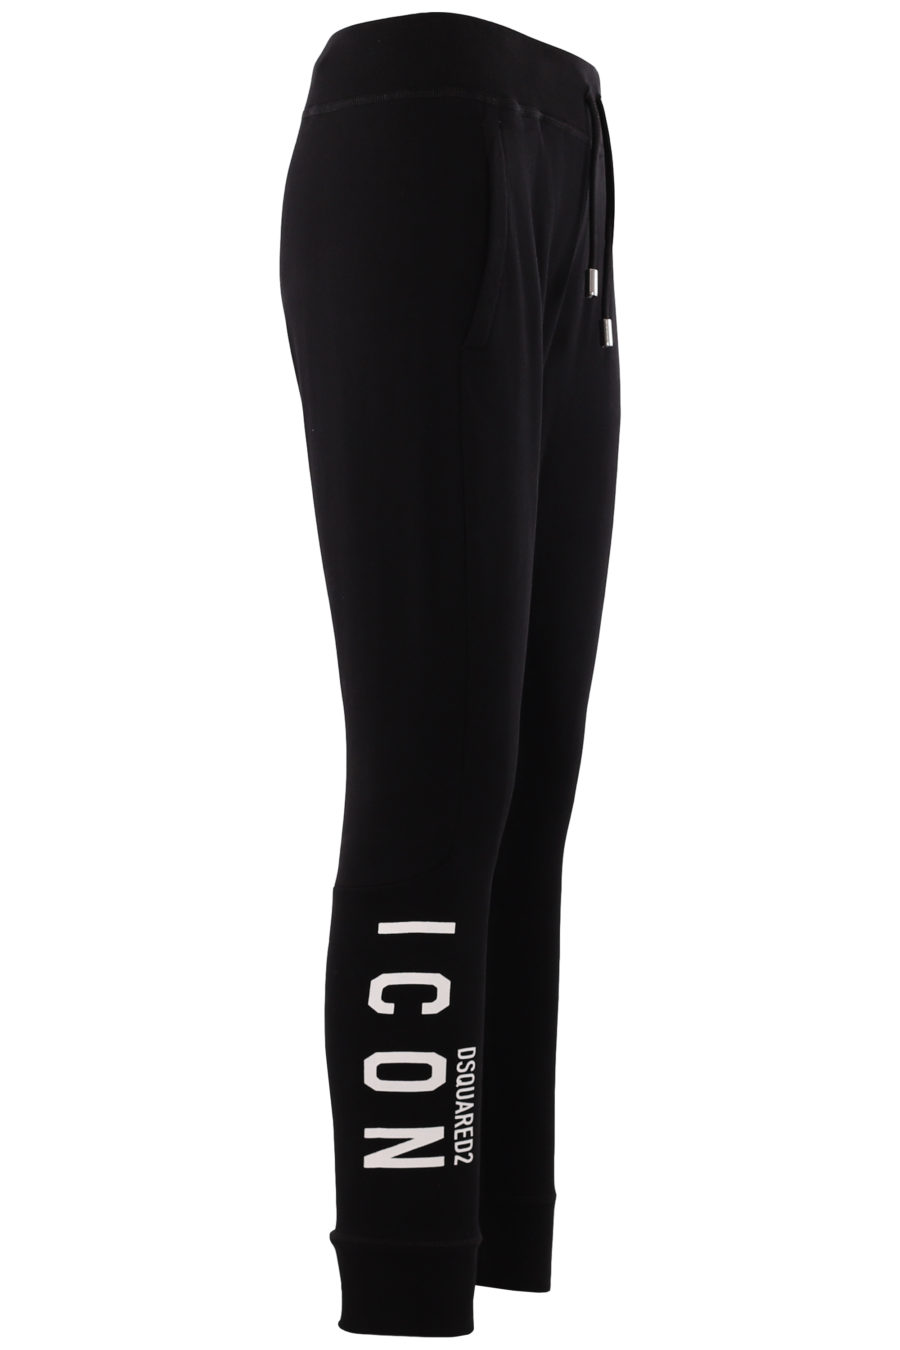 Tracksuit bottoms black with white "Icon" logo - d6b8713b466e2fa76ee387bc6d34477ab8d5f7db